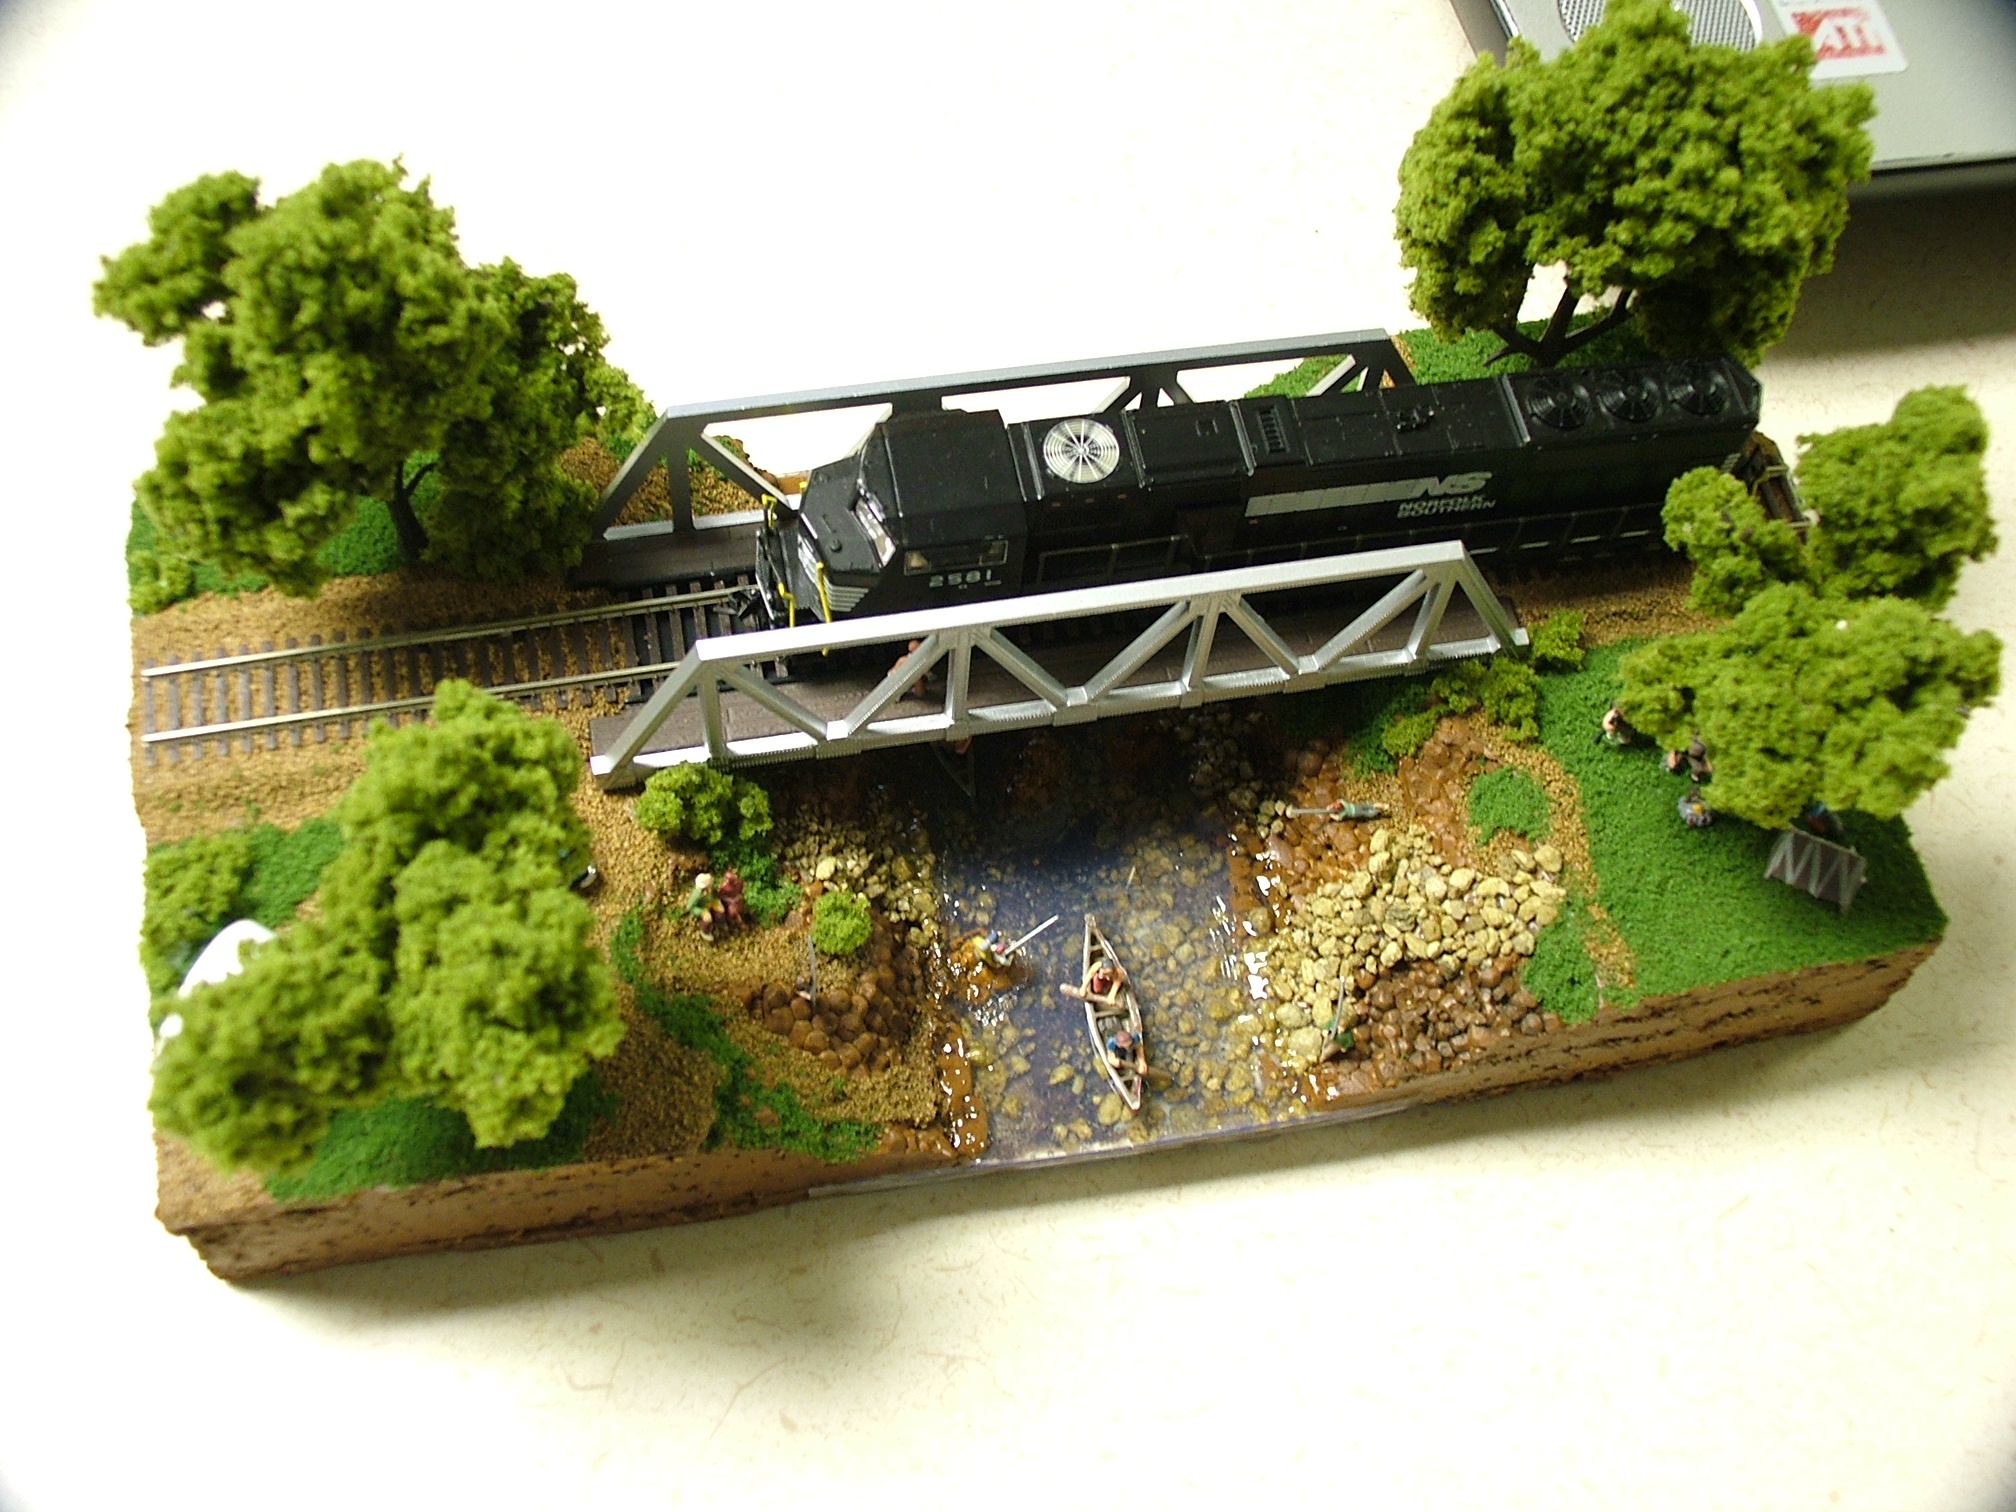 People Fishing, boating and camping. Which I'll and to my layout later 